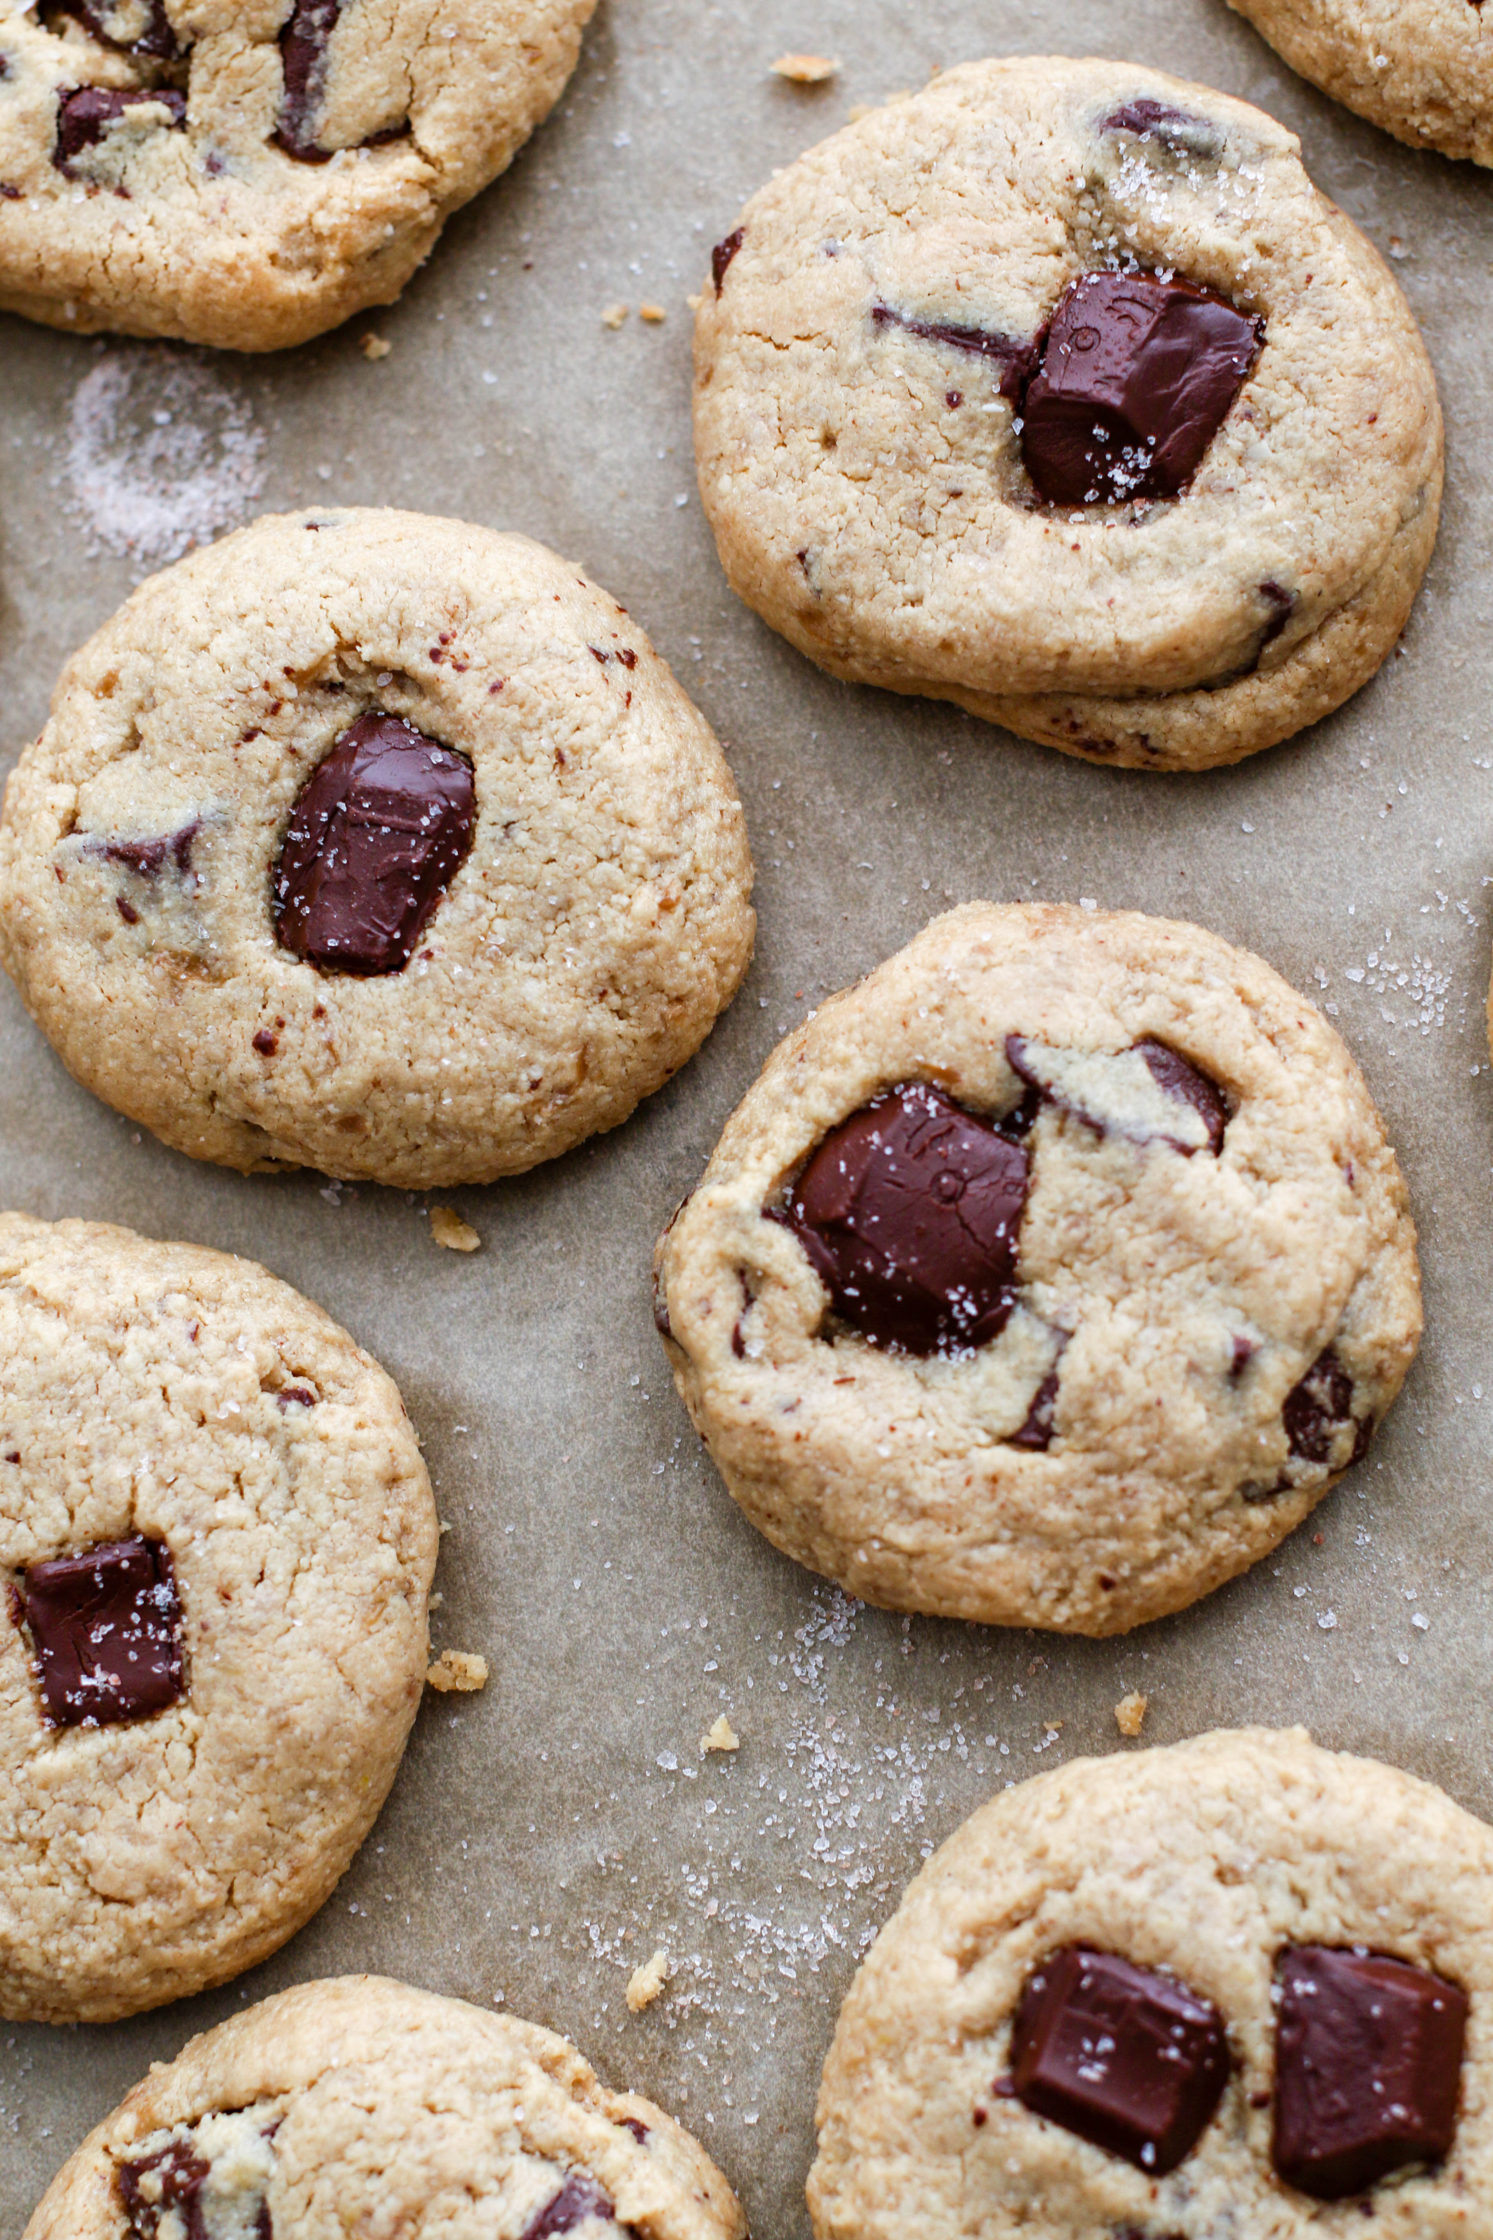 Salted Cashew Butter Chocolate Chunk Cookies